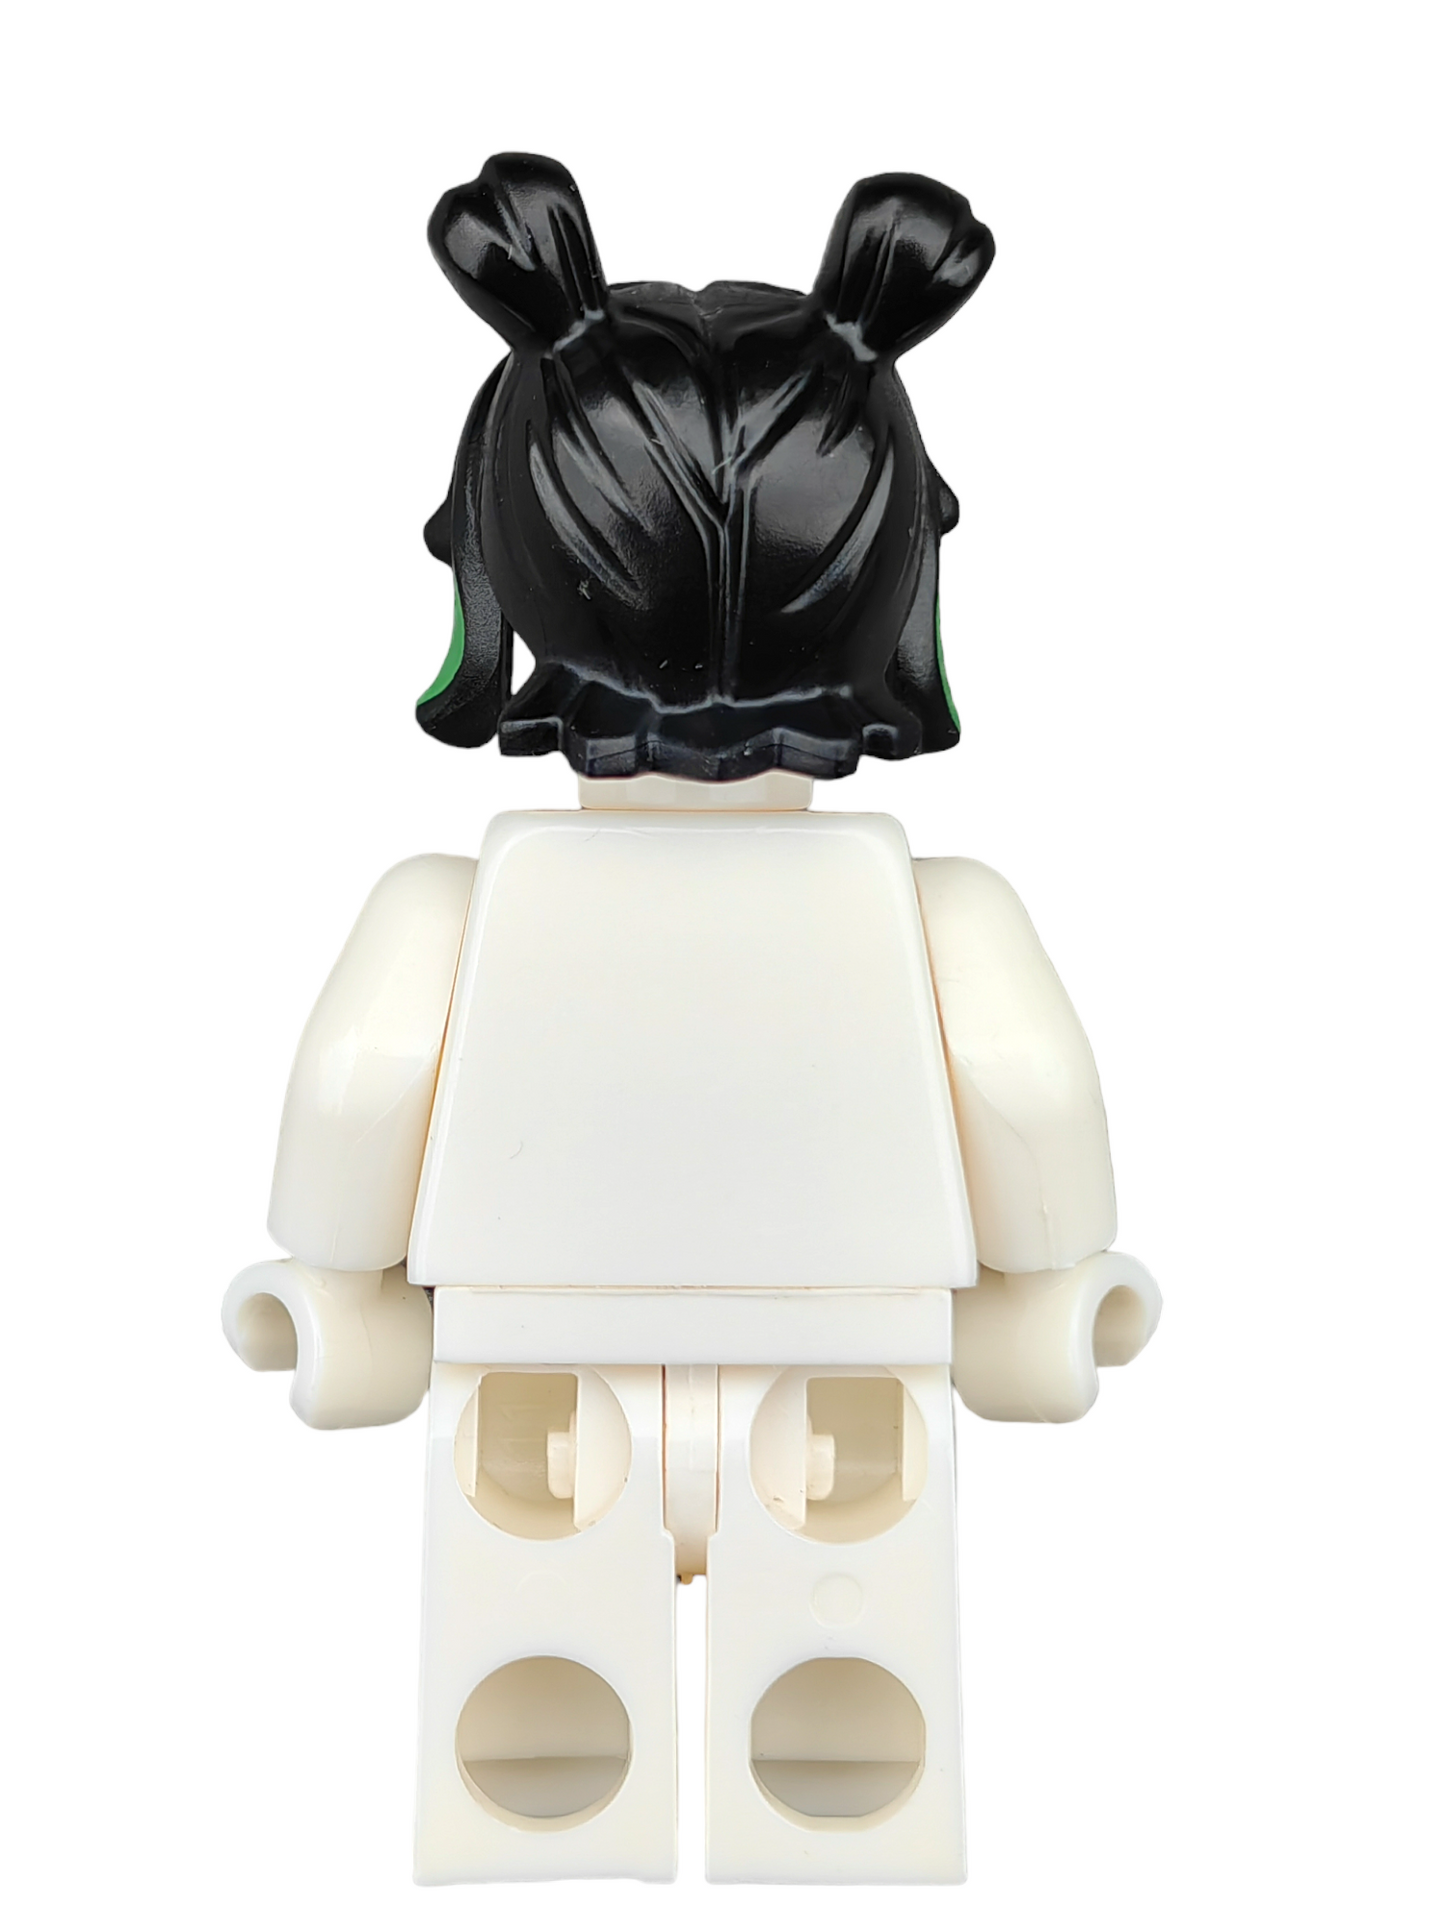 LEGO Wig, Black Hair with Two Buns and Thick Sides with Green Highlights - UB1263